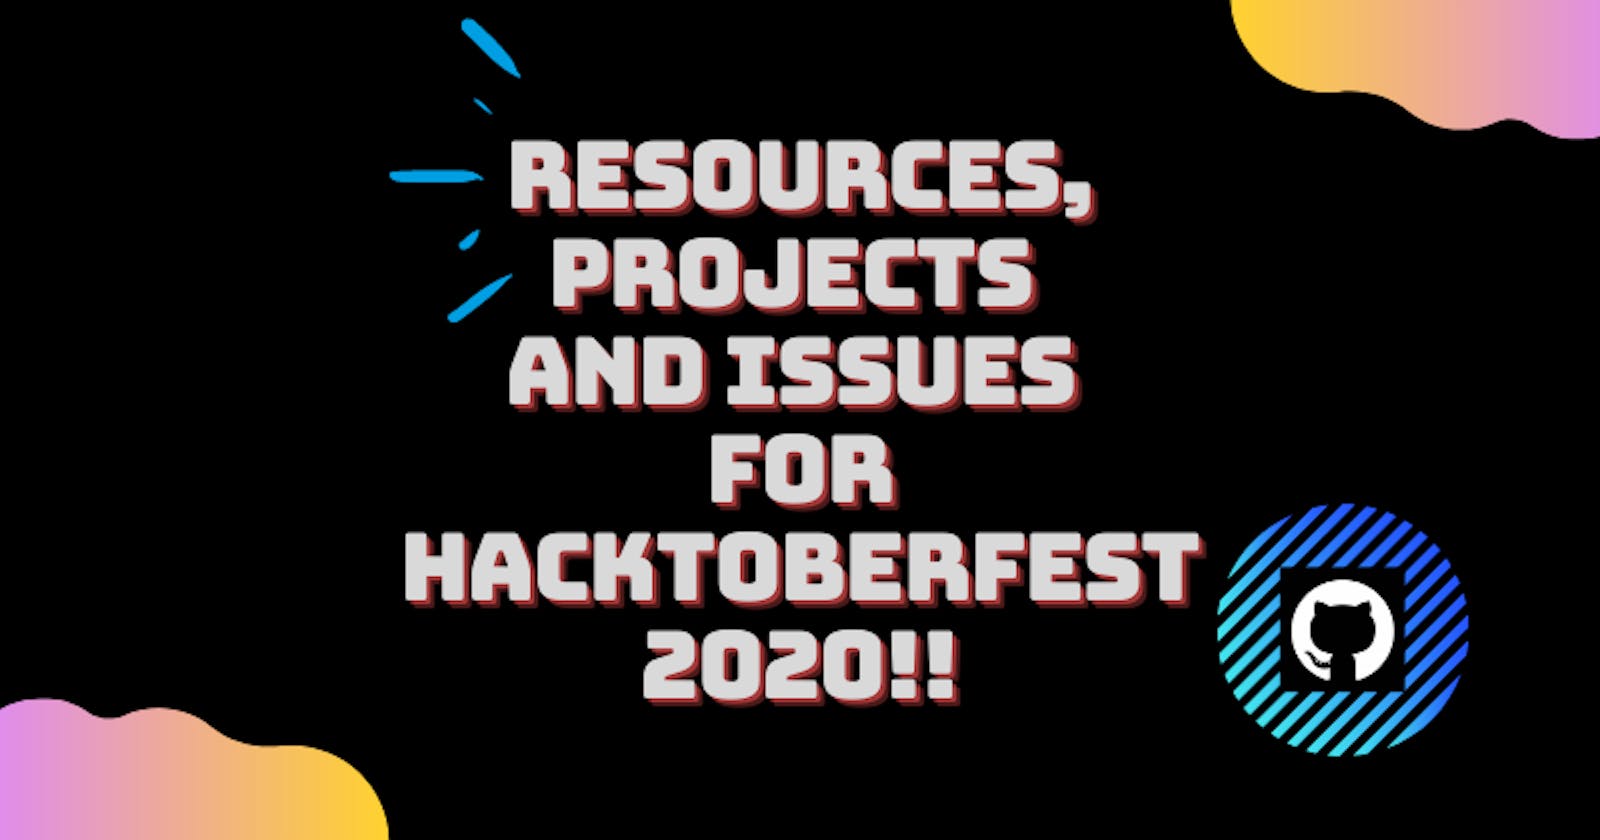 Resources, Projects and Issues for Hacktoberfest 2020!!